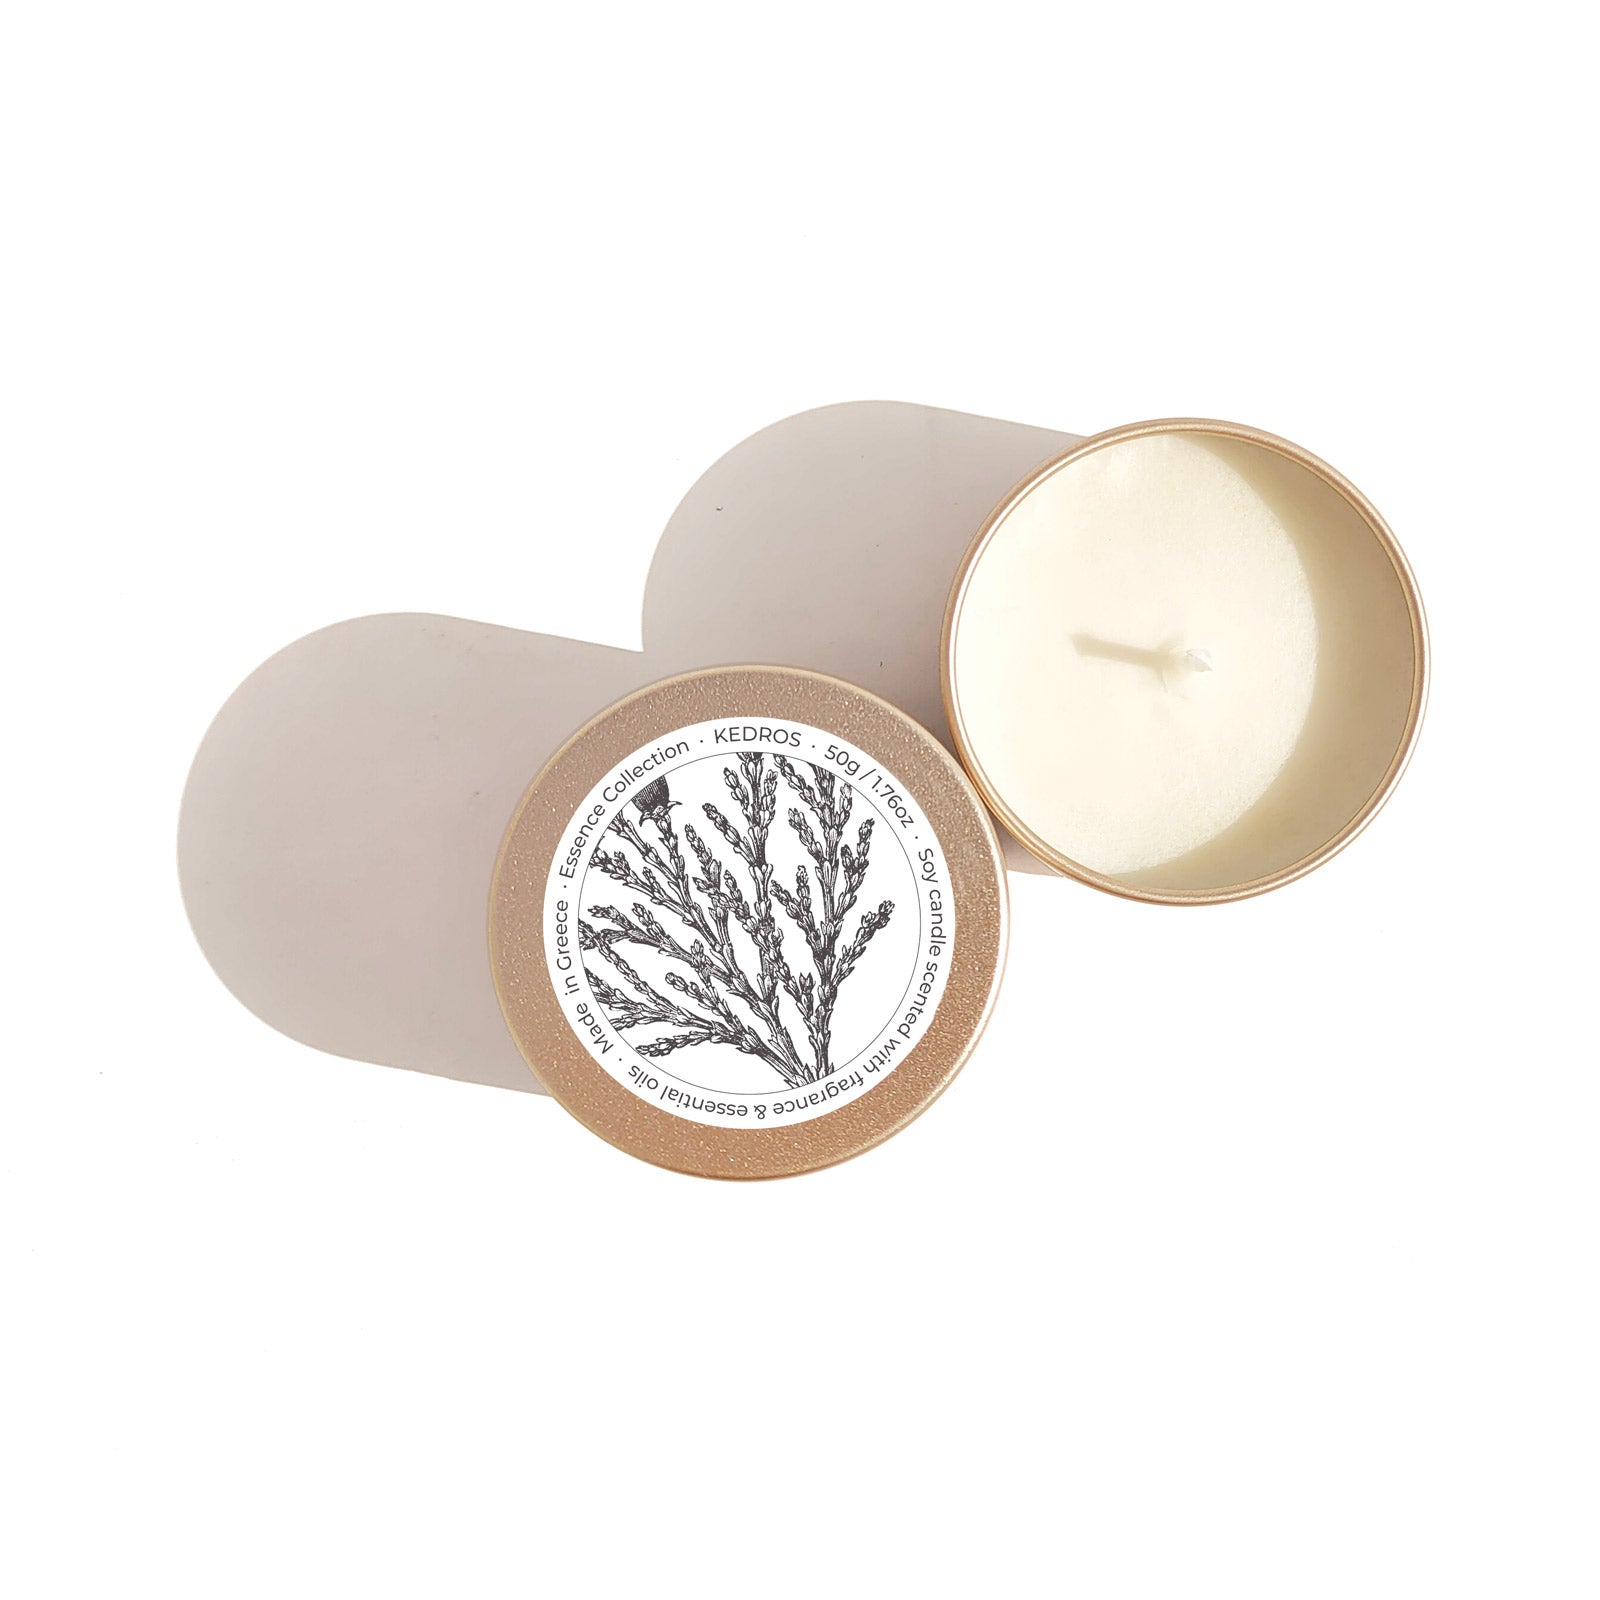 Thymos Travel Candle. Scent notes: thyme, basil & lemon. Made in Greece.